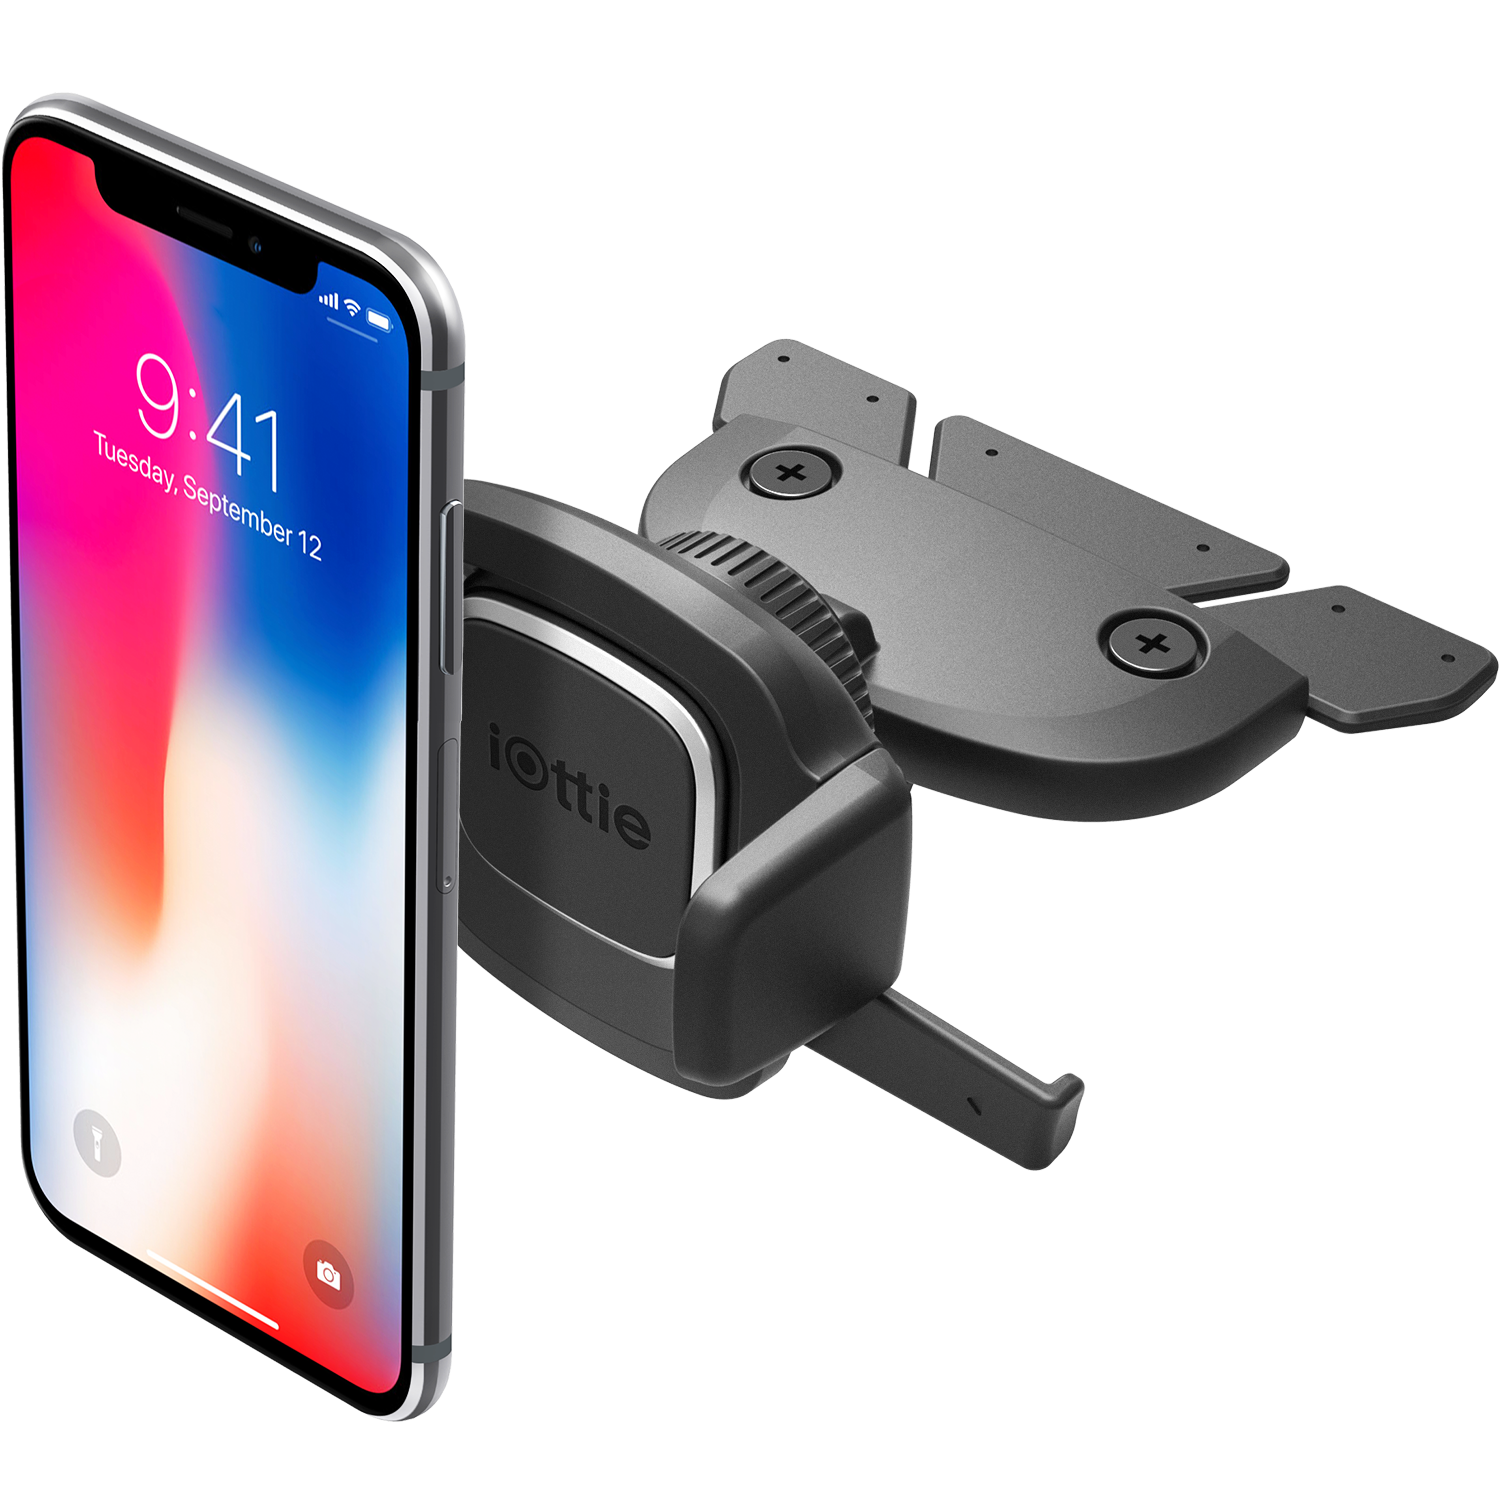 iPhone Mounted on the iOttie Easy One Touch 4 CD Slot Universal Car Mount Phone Holder for iPhone, Samsung, Moto, Huawei, Nokia, LG, Google Smartphones